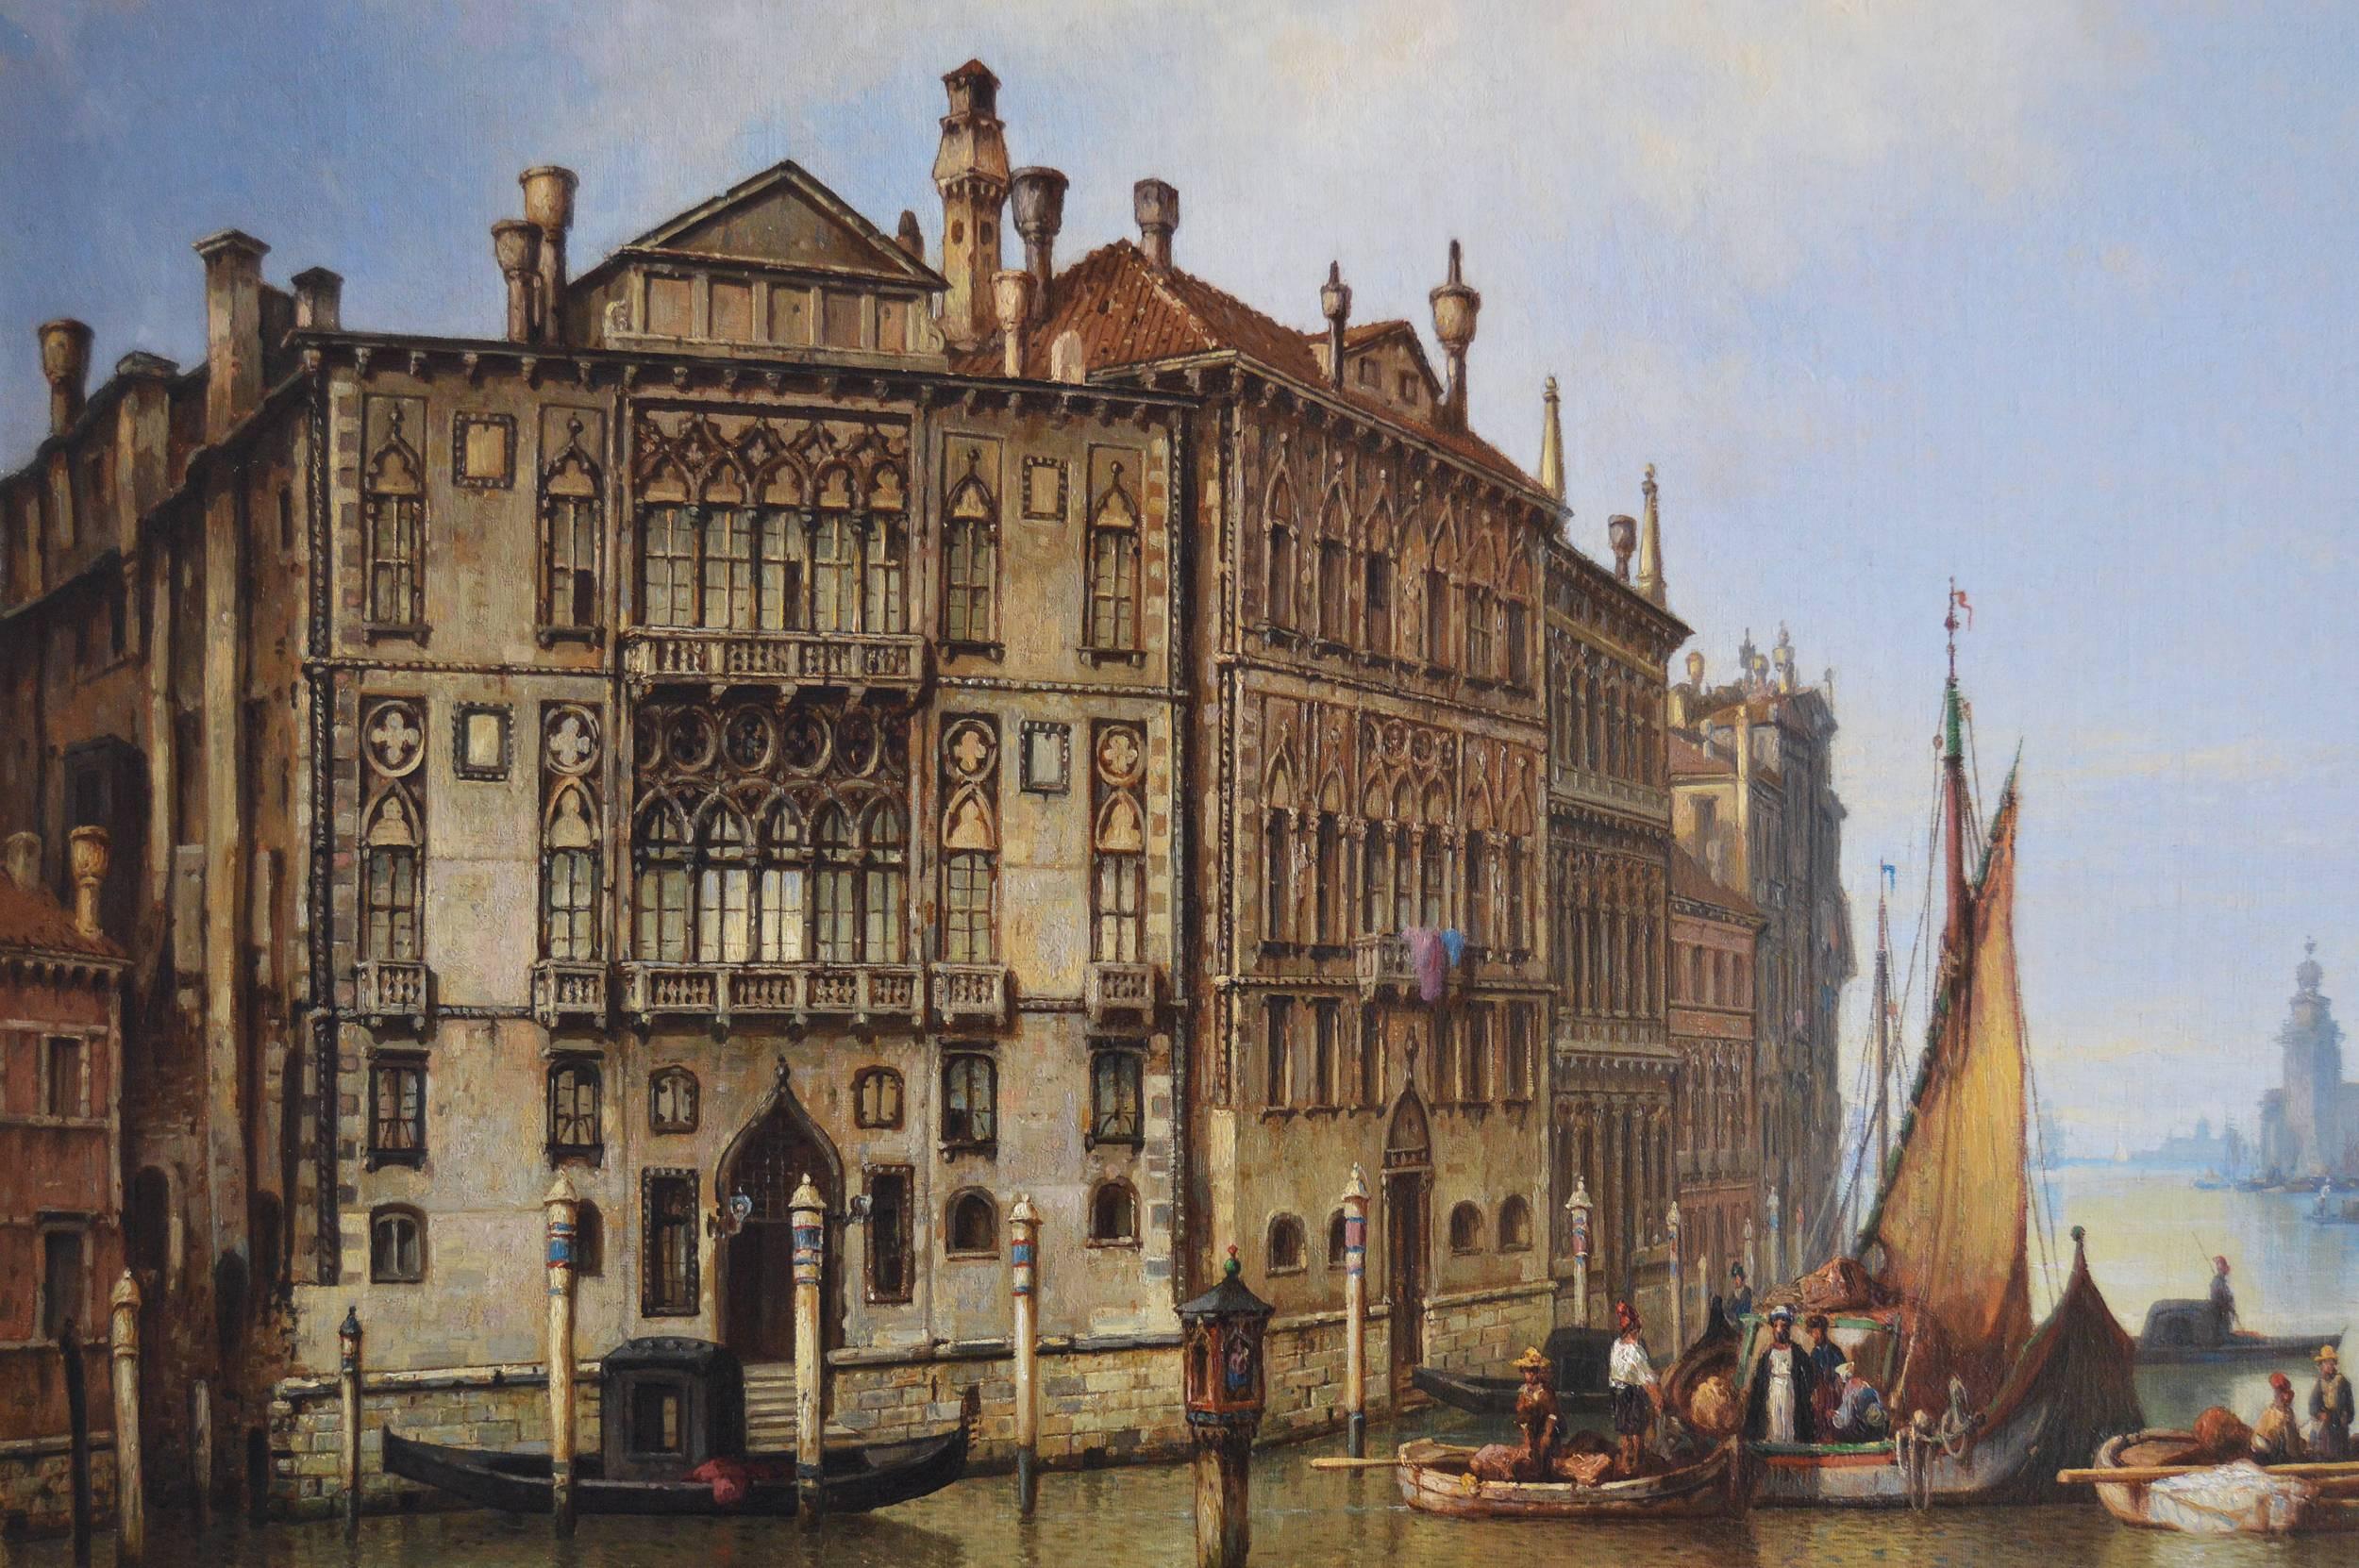 Ludwig Hermann
German, (1812 - 1881)
Venice
Oil on canvas, signed & dated 1873
Image size: 26¾ inches x 38 inches 
Size including frame: 33¼ inches x 44½ inches
Ludwig Hermann was a marine and architectural landscape artist who was born in